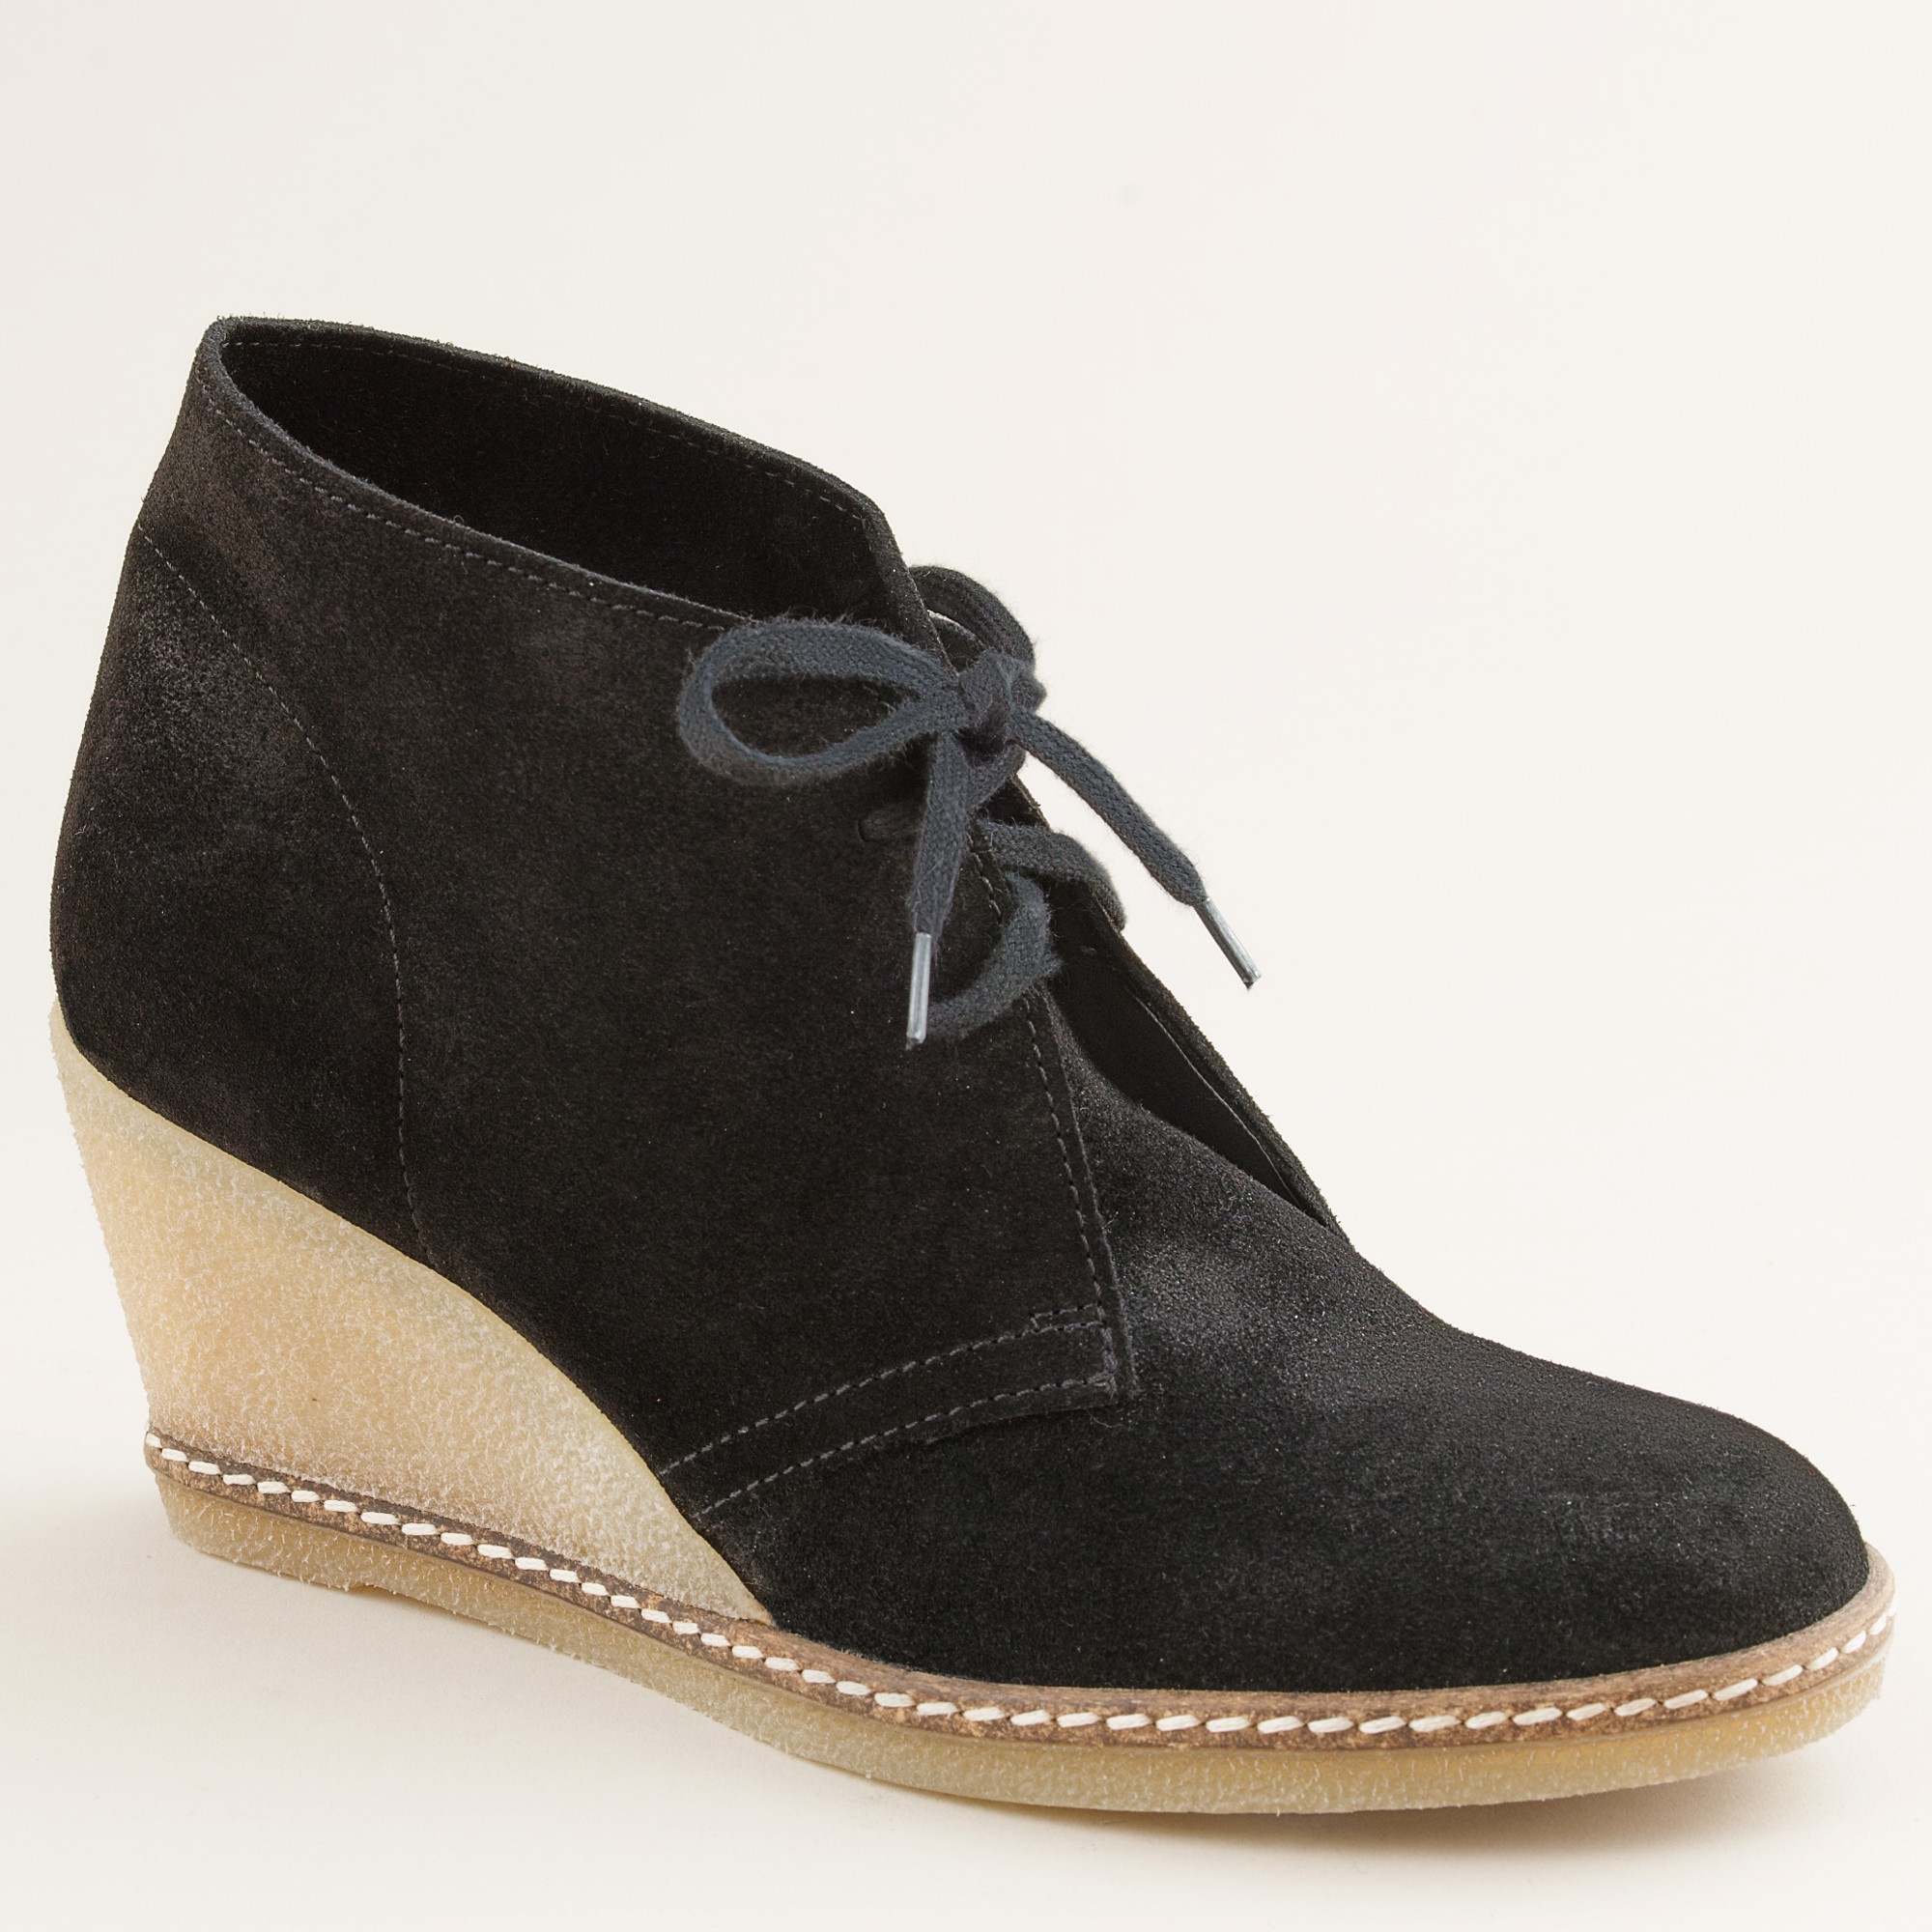 J.crew Macalister Wedge Boots in Black | Lyst